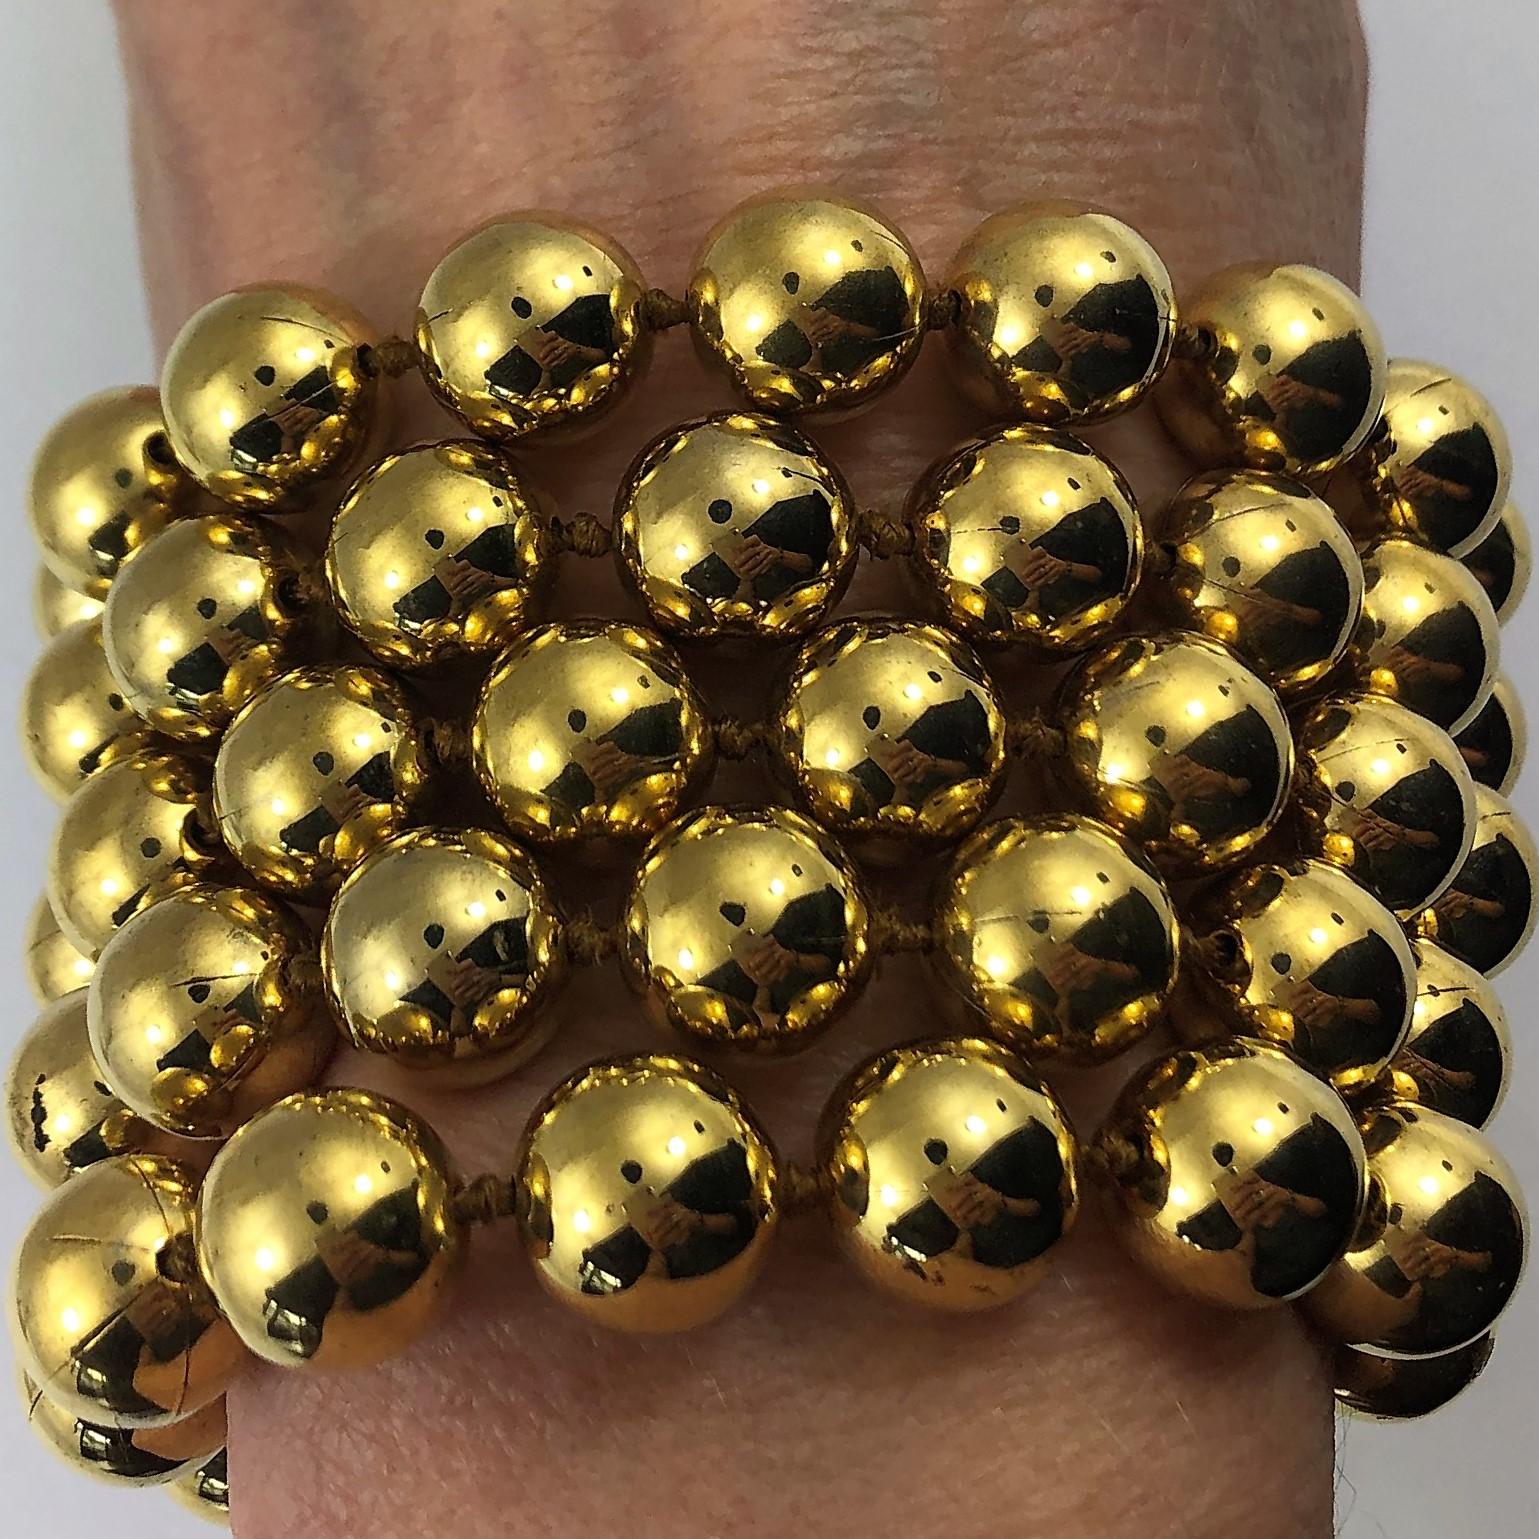 This over the top, Vintage Chanel 5 strand, 10mm gold tone bead bracelet
measures 2 1/4 inches wide. The adjustable clasp in the back allows for various
lengths, ranging tom 7 to 8 1/2 inches. Part of Chanel's Season 27 from 1990. 
Marked Chanel 2